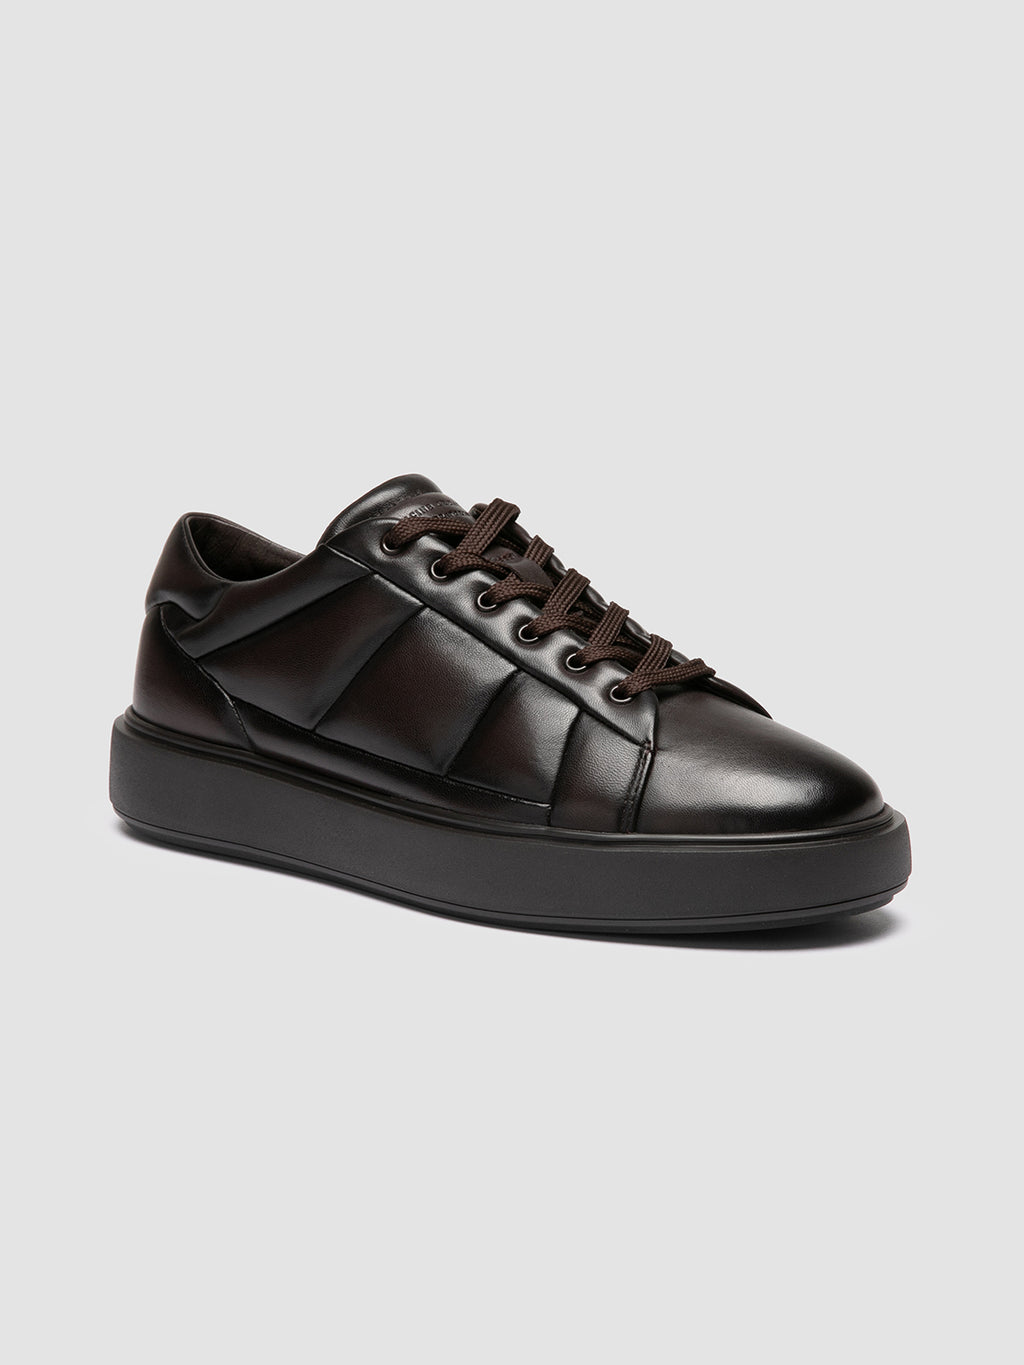 LEISURE 001 - Brown Leather Low Top Sneakers